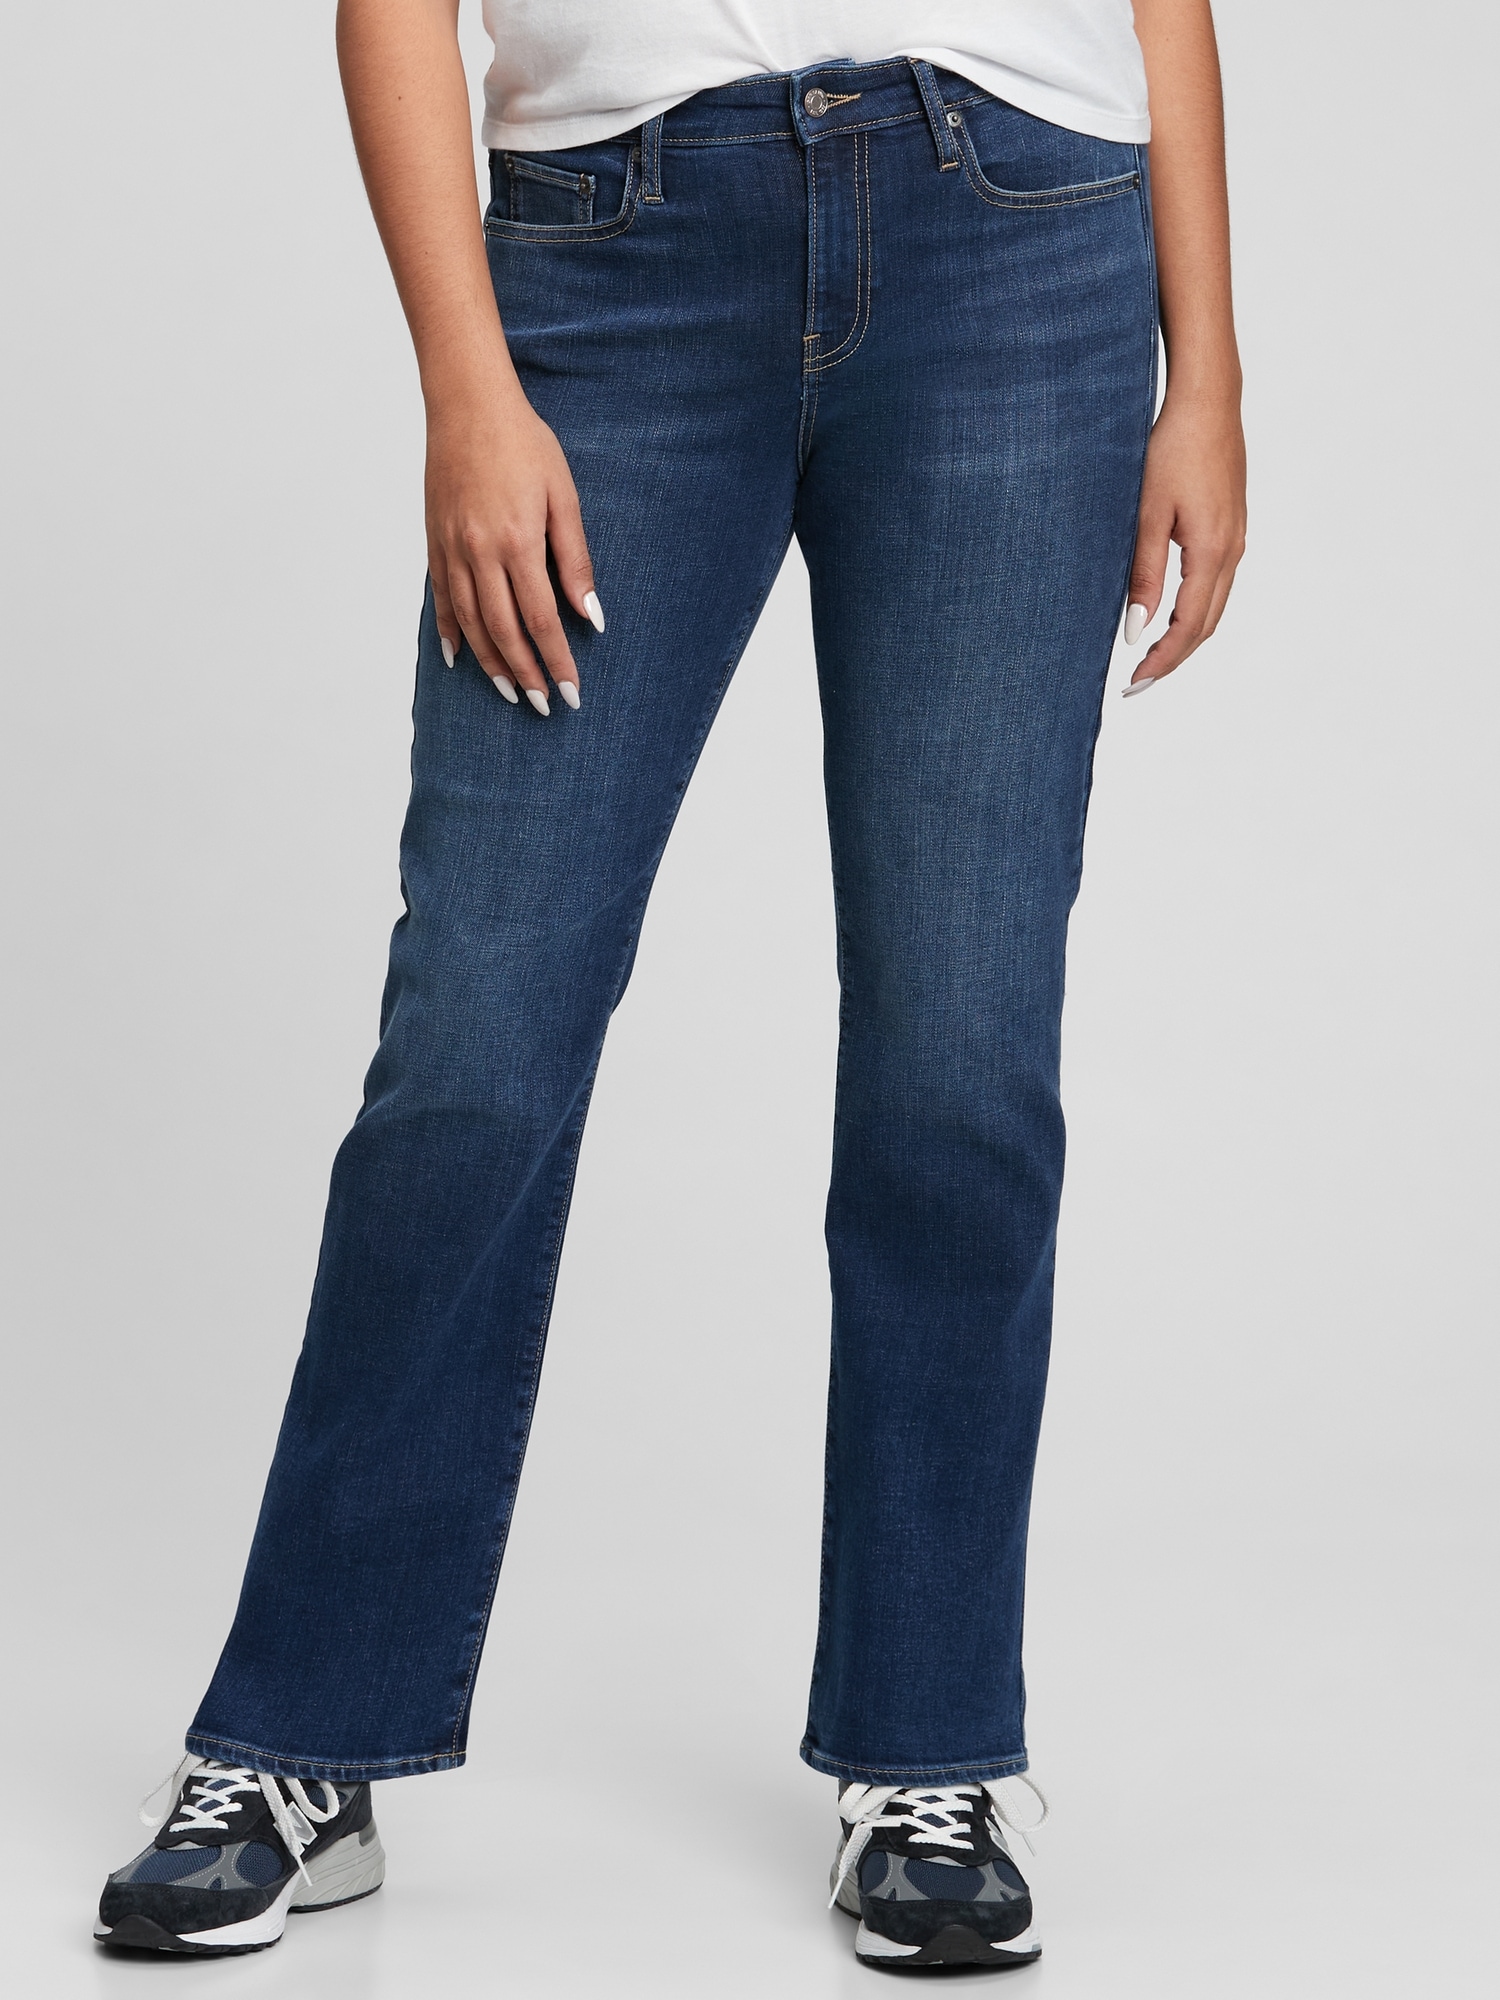 lanthan Besættelse basen Mid Rise Classic Straight Jeans with Washwell | Gap Factory